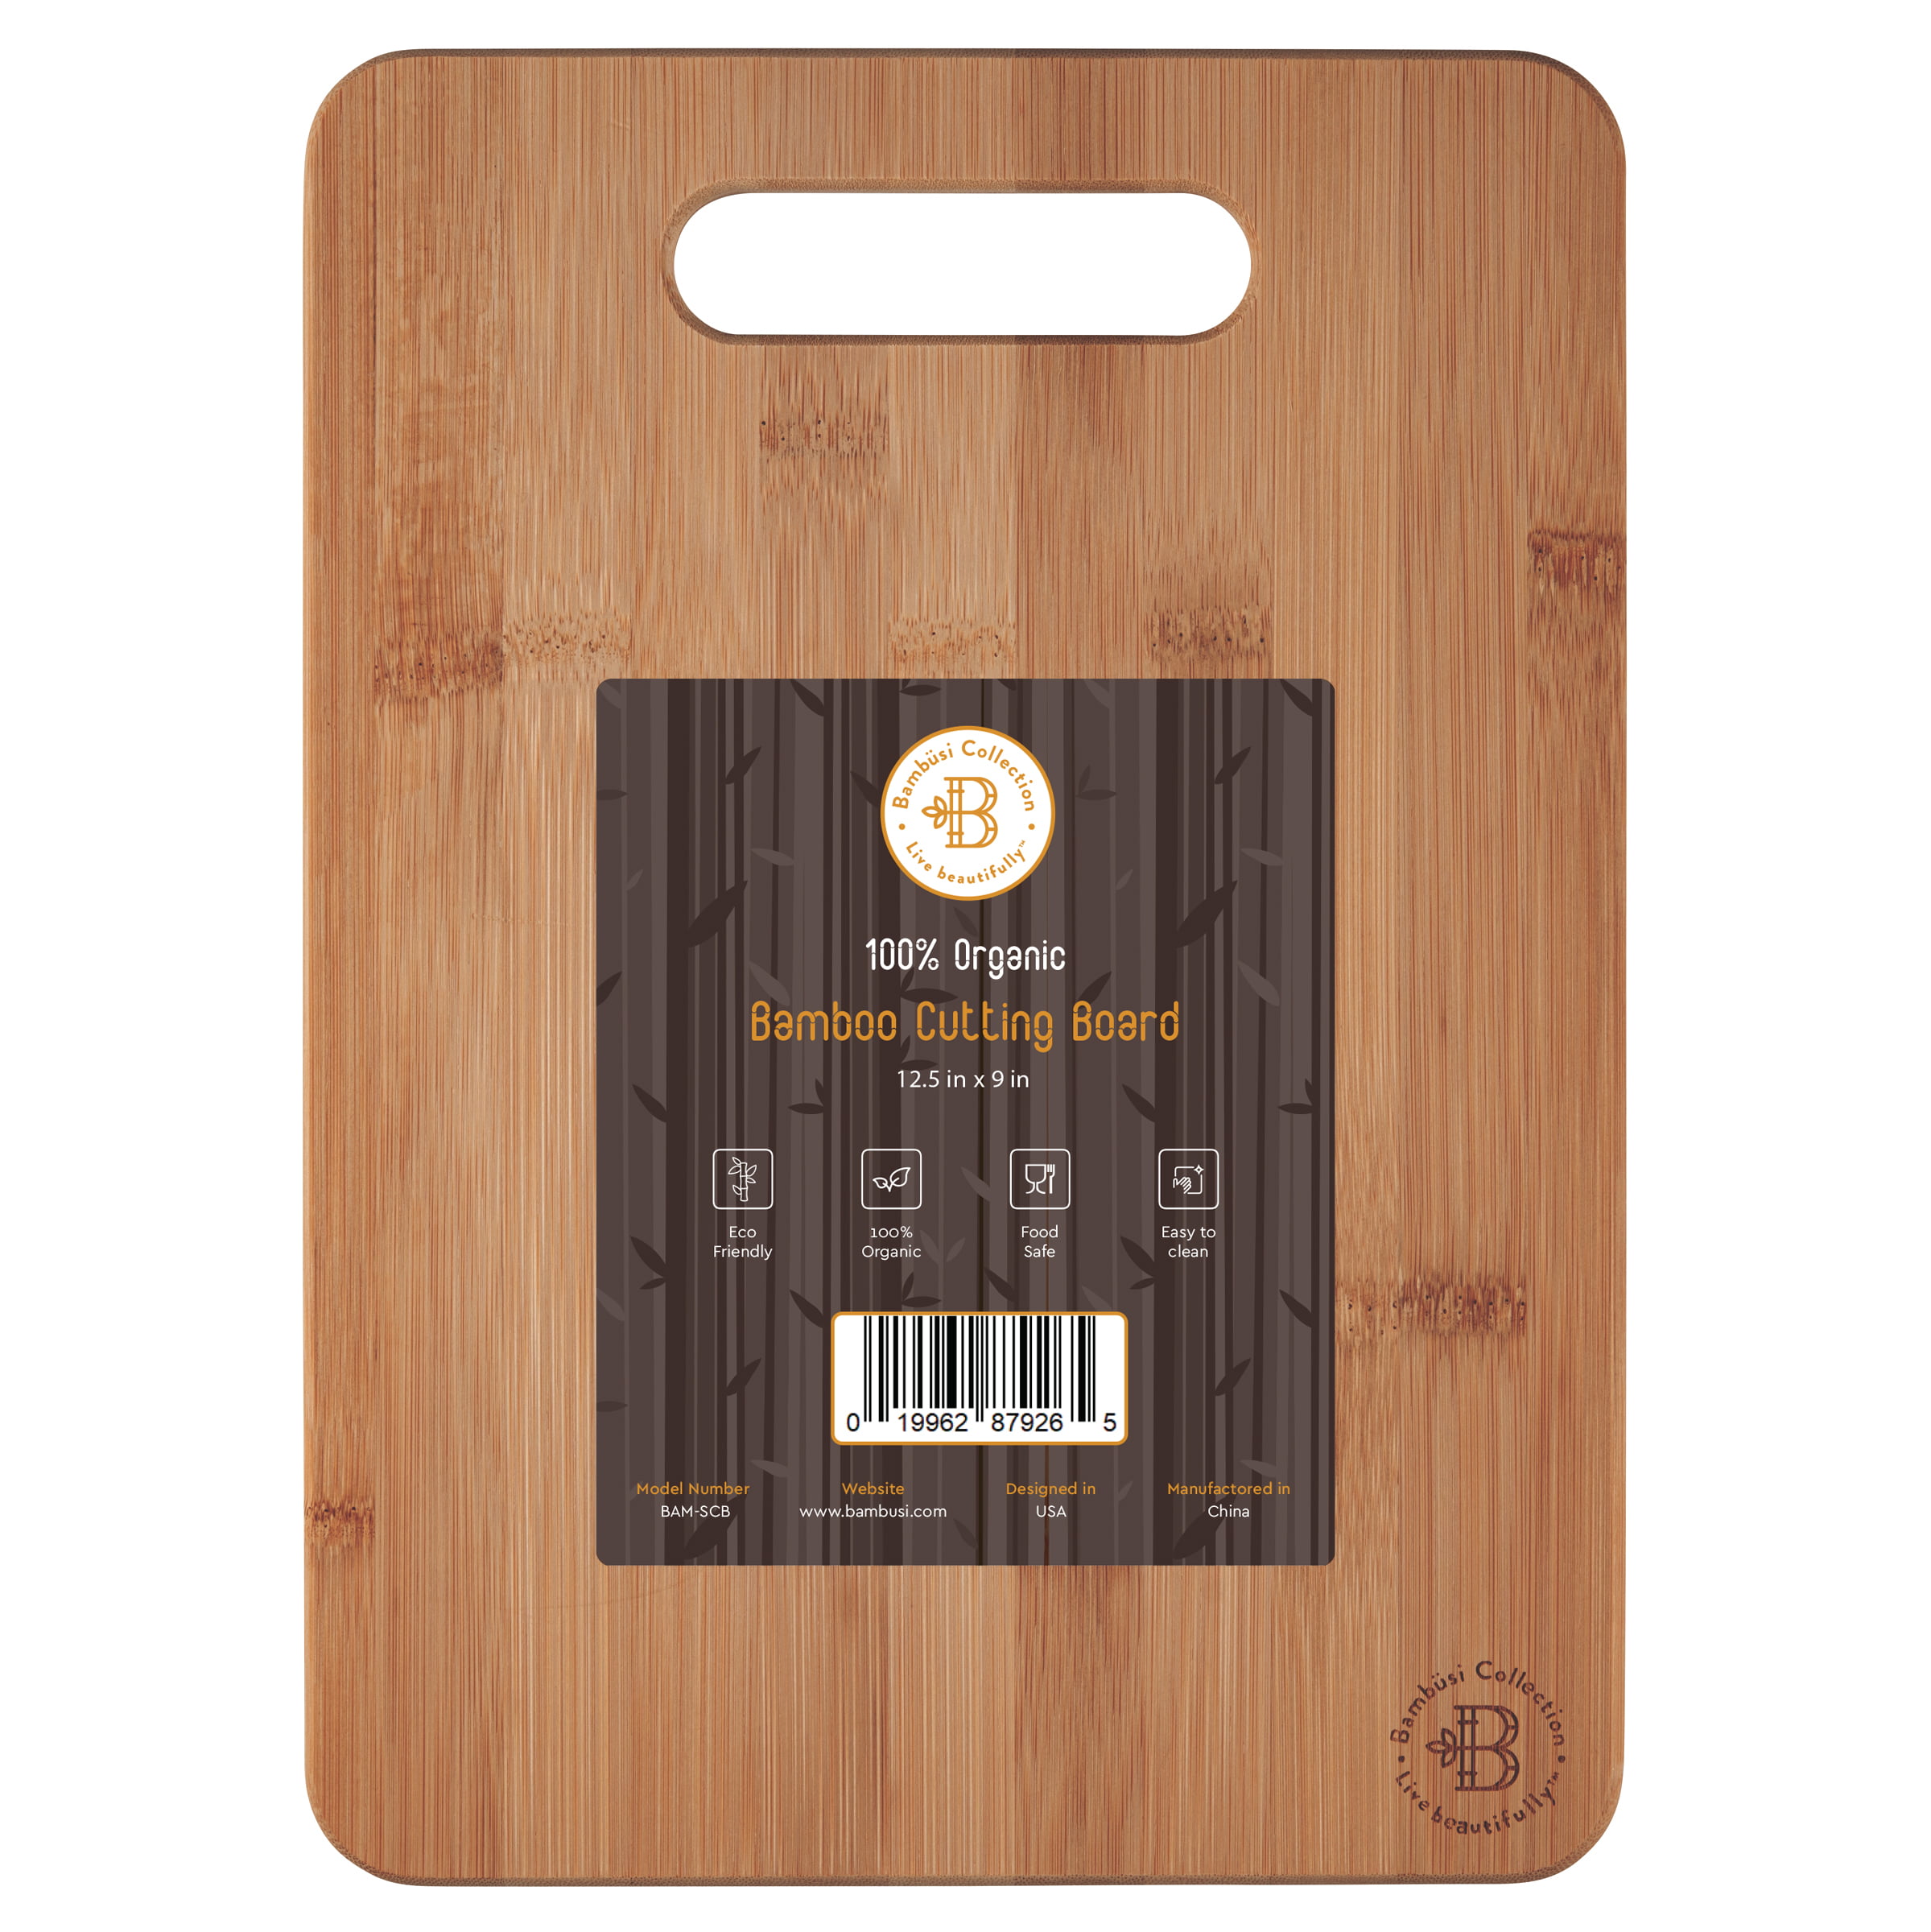 100% Organic bamboo Oliva Italiana Bamboo Texas State Cutting Board Eco-Friendly and wont dull your blade Please that gourmet in your life with the best cutting board. Professional-Grade 